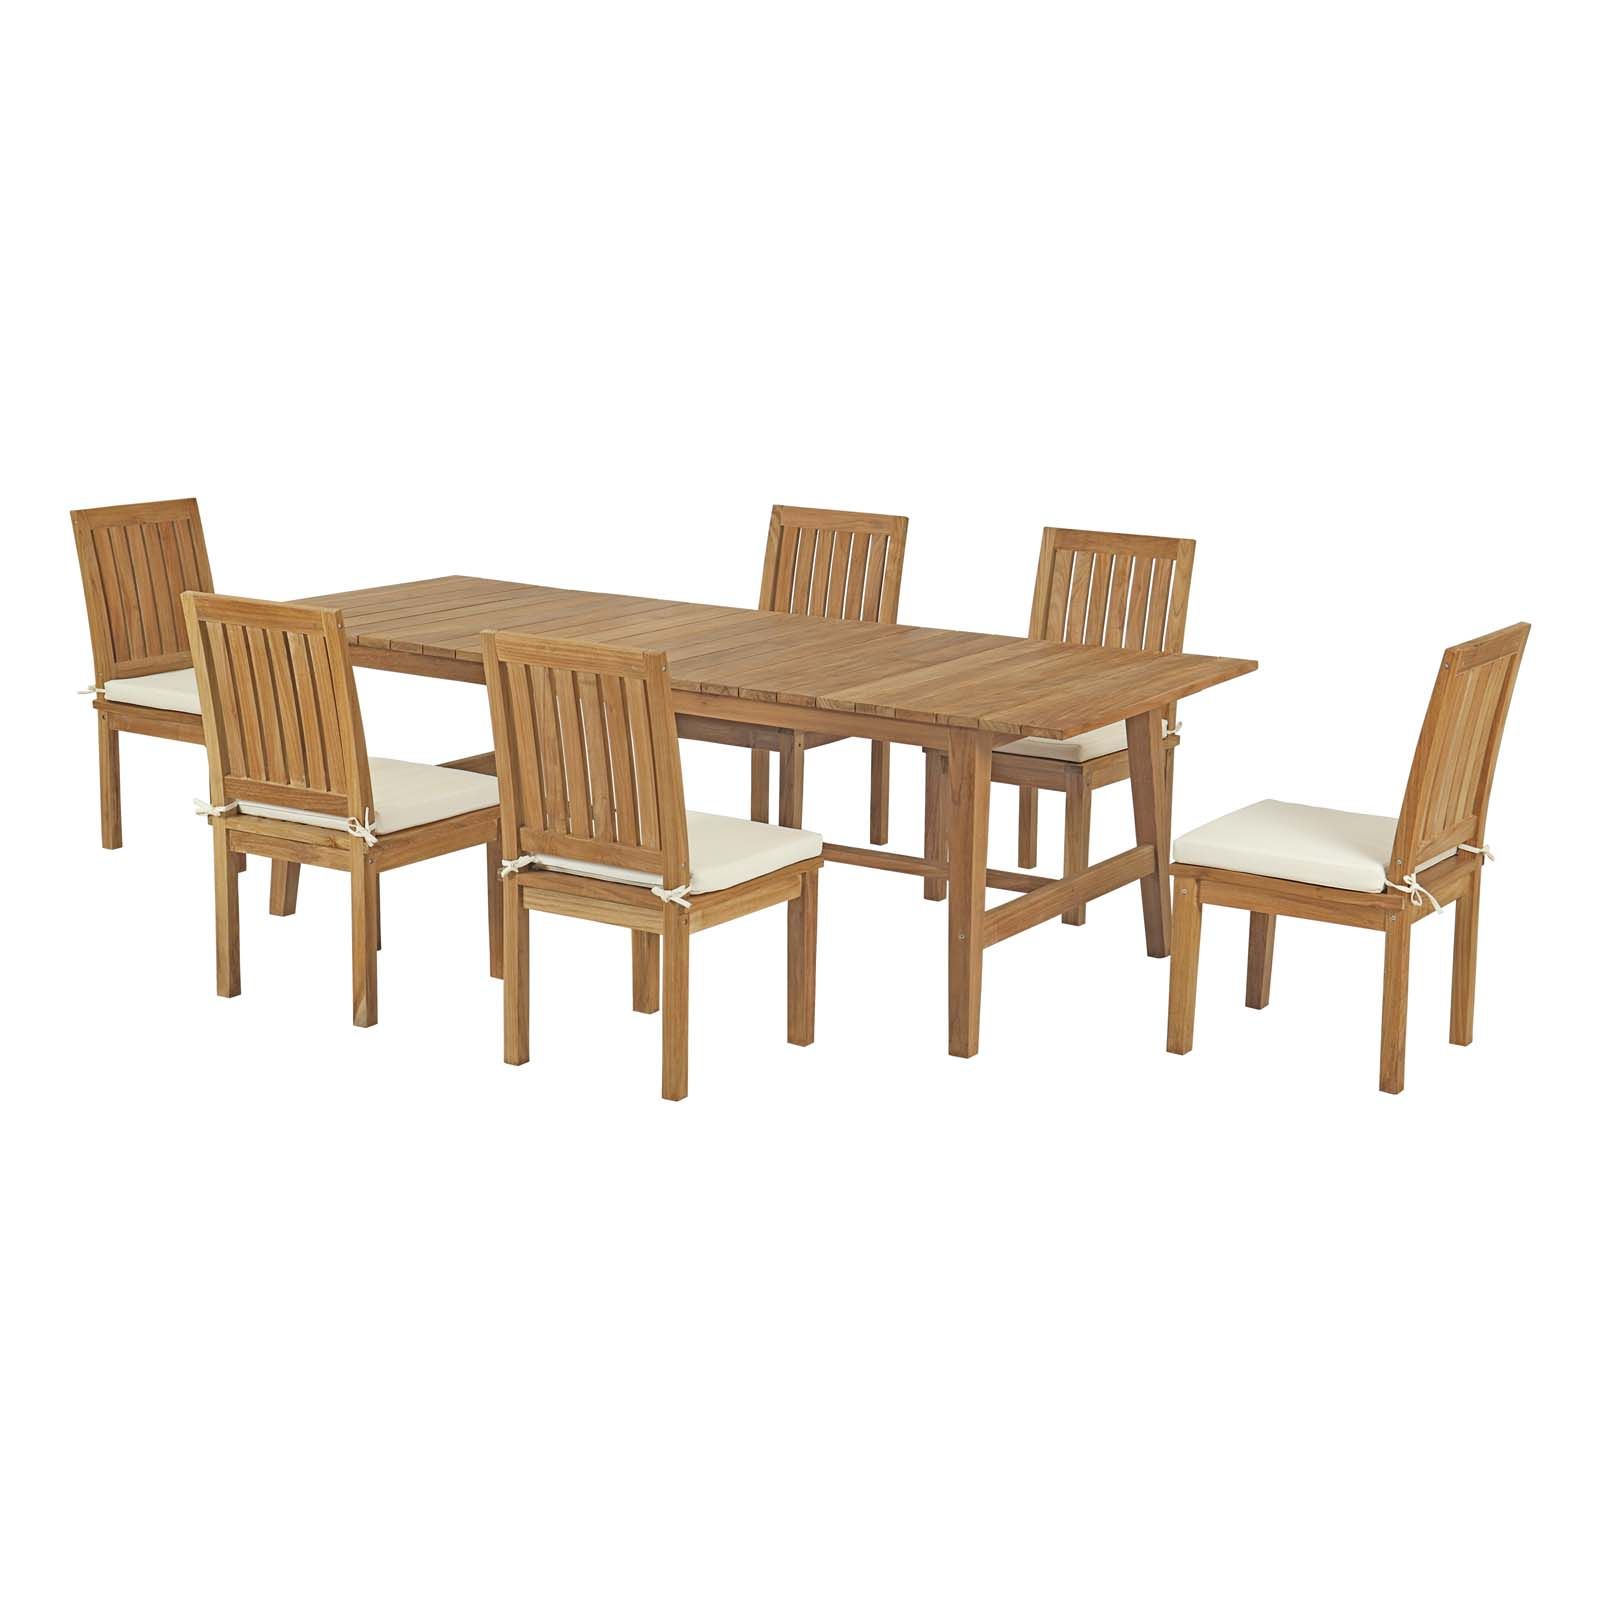 Preferred 7 Pieces Teak Outdoor Dining Sets Inside Marina 7 Piece Outdoor Patio Teak Outdoor Dining Set (View 8 of 15)